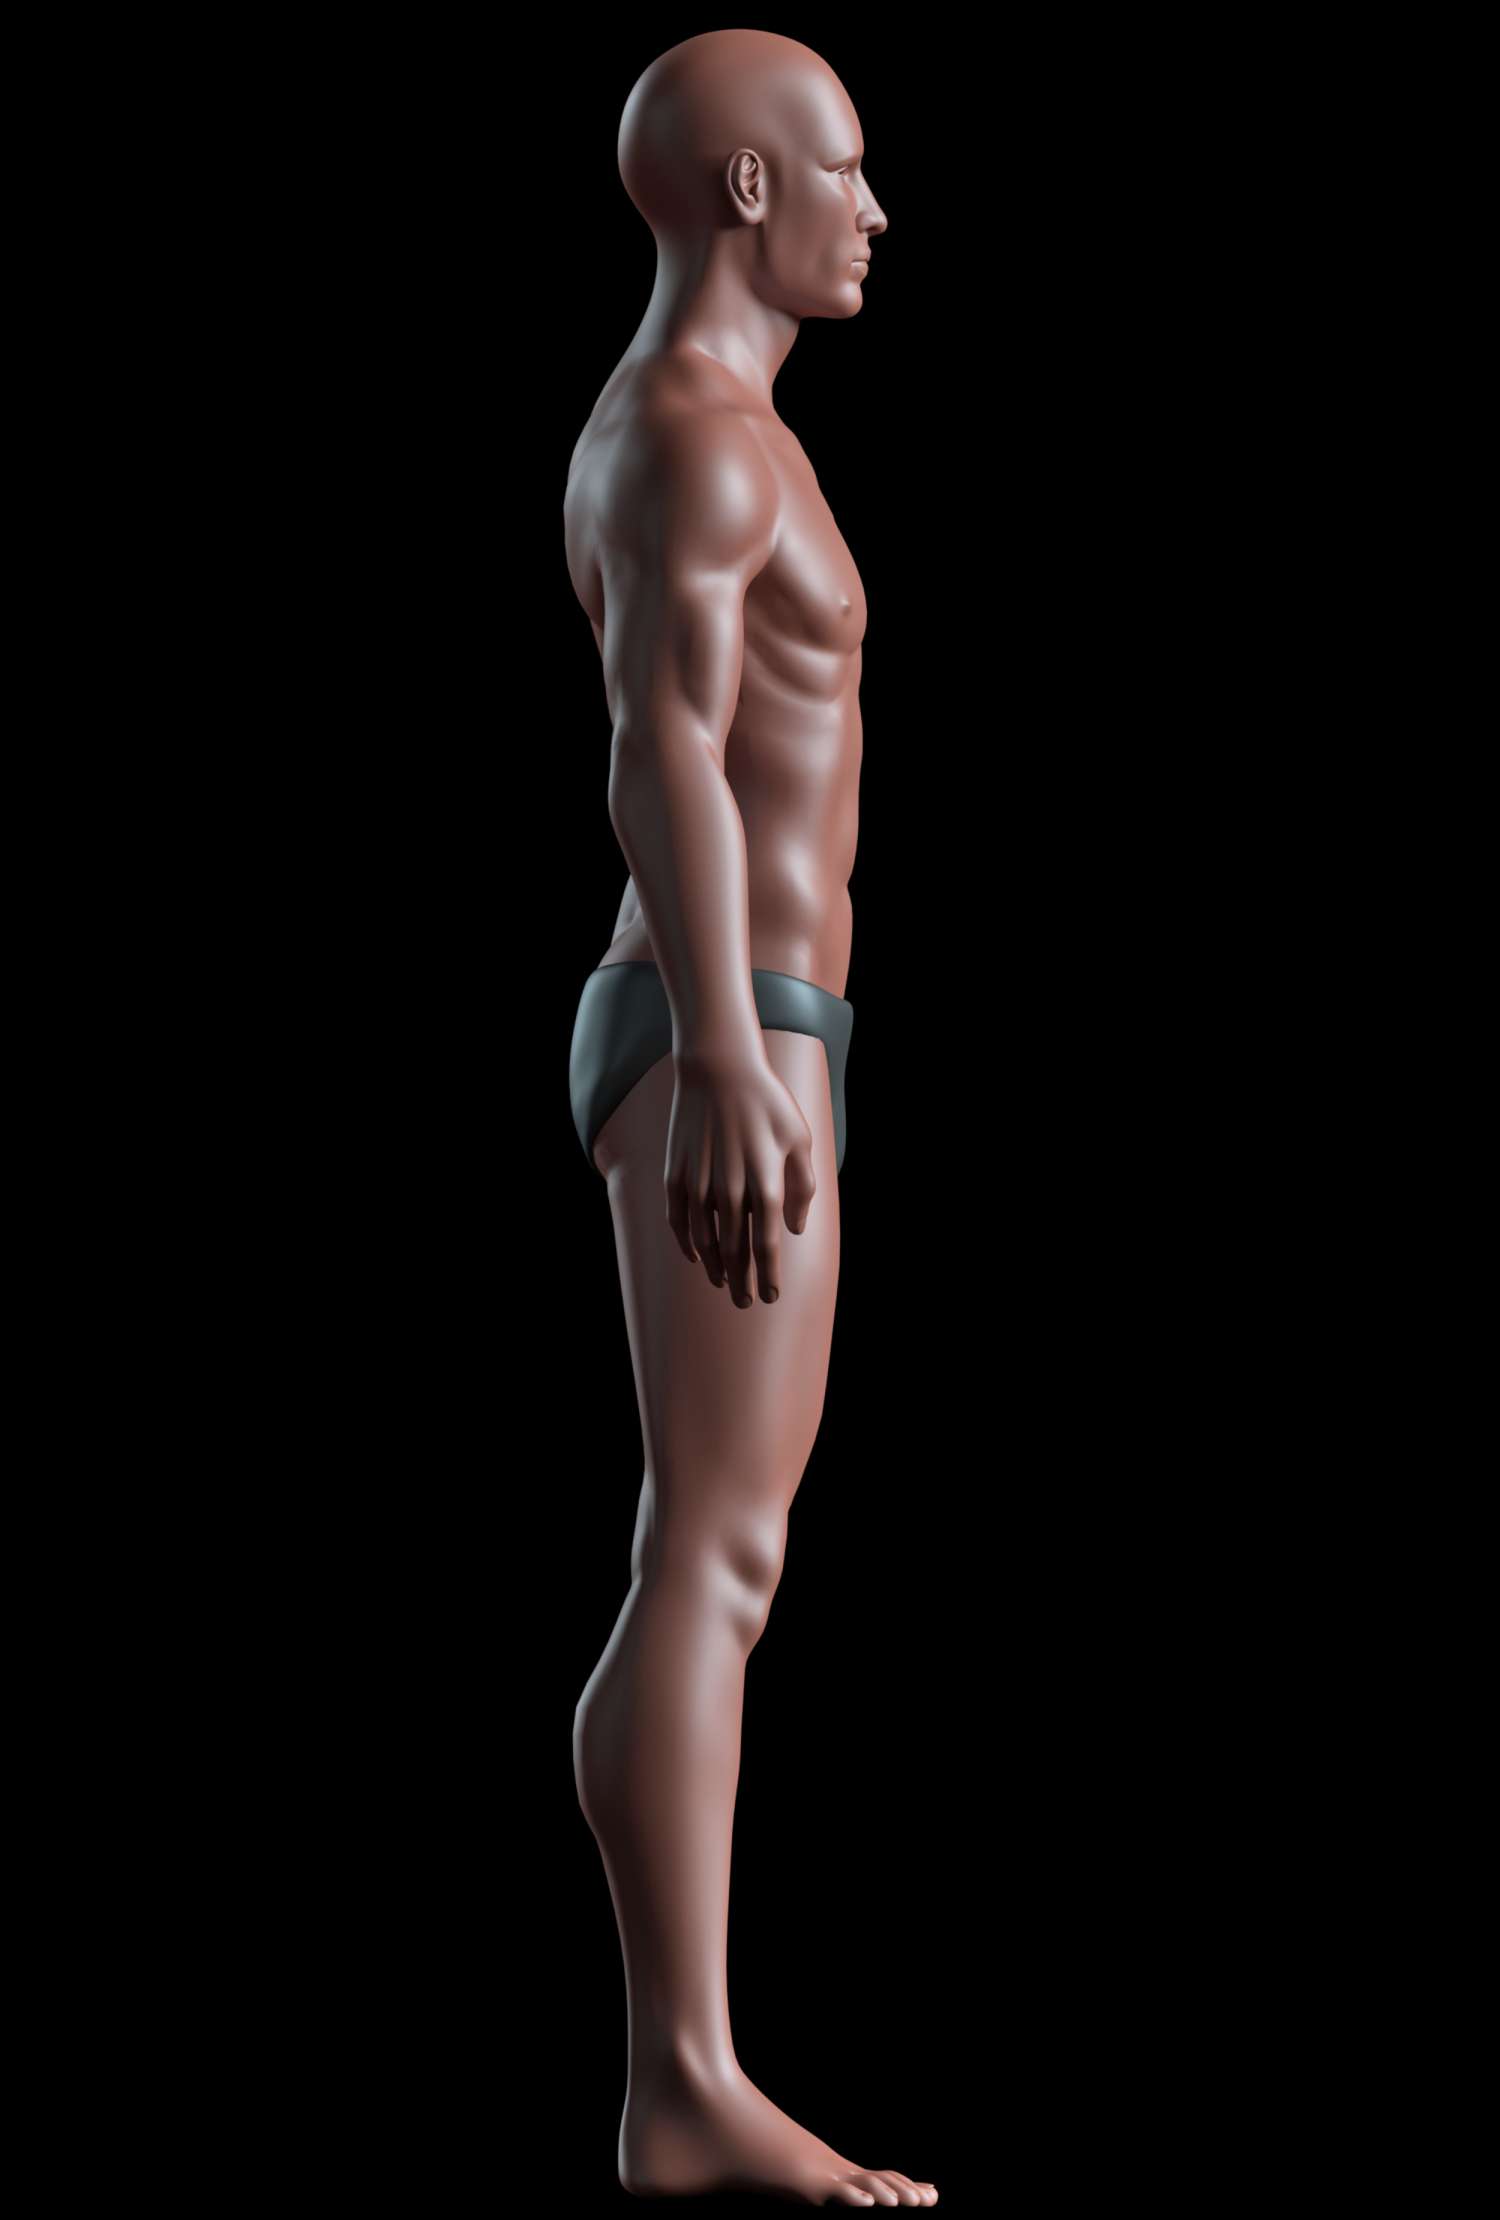 Person // 3D Model Download for Blender 3.4.1 by CappyAdams on